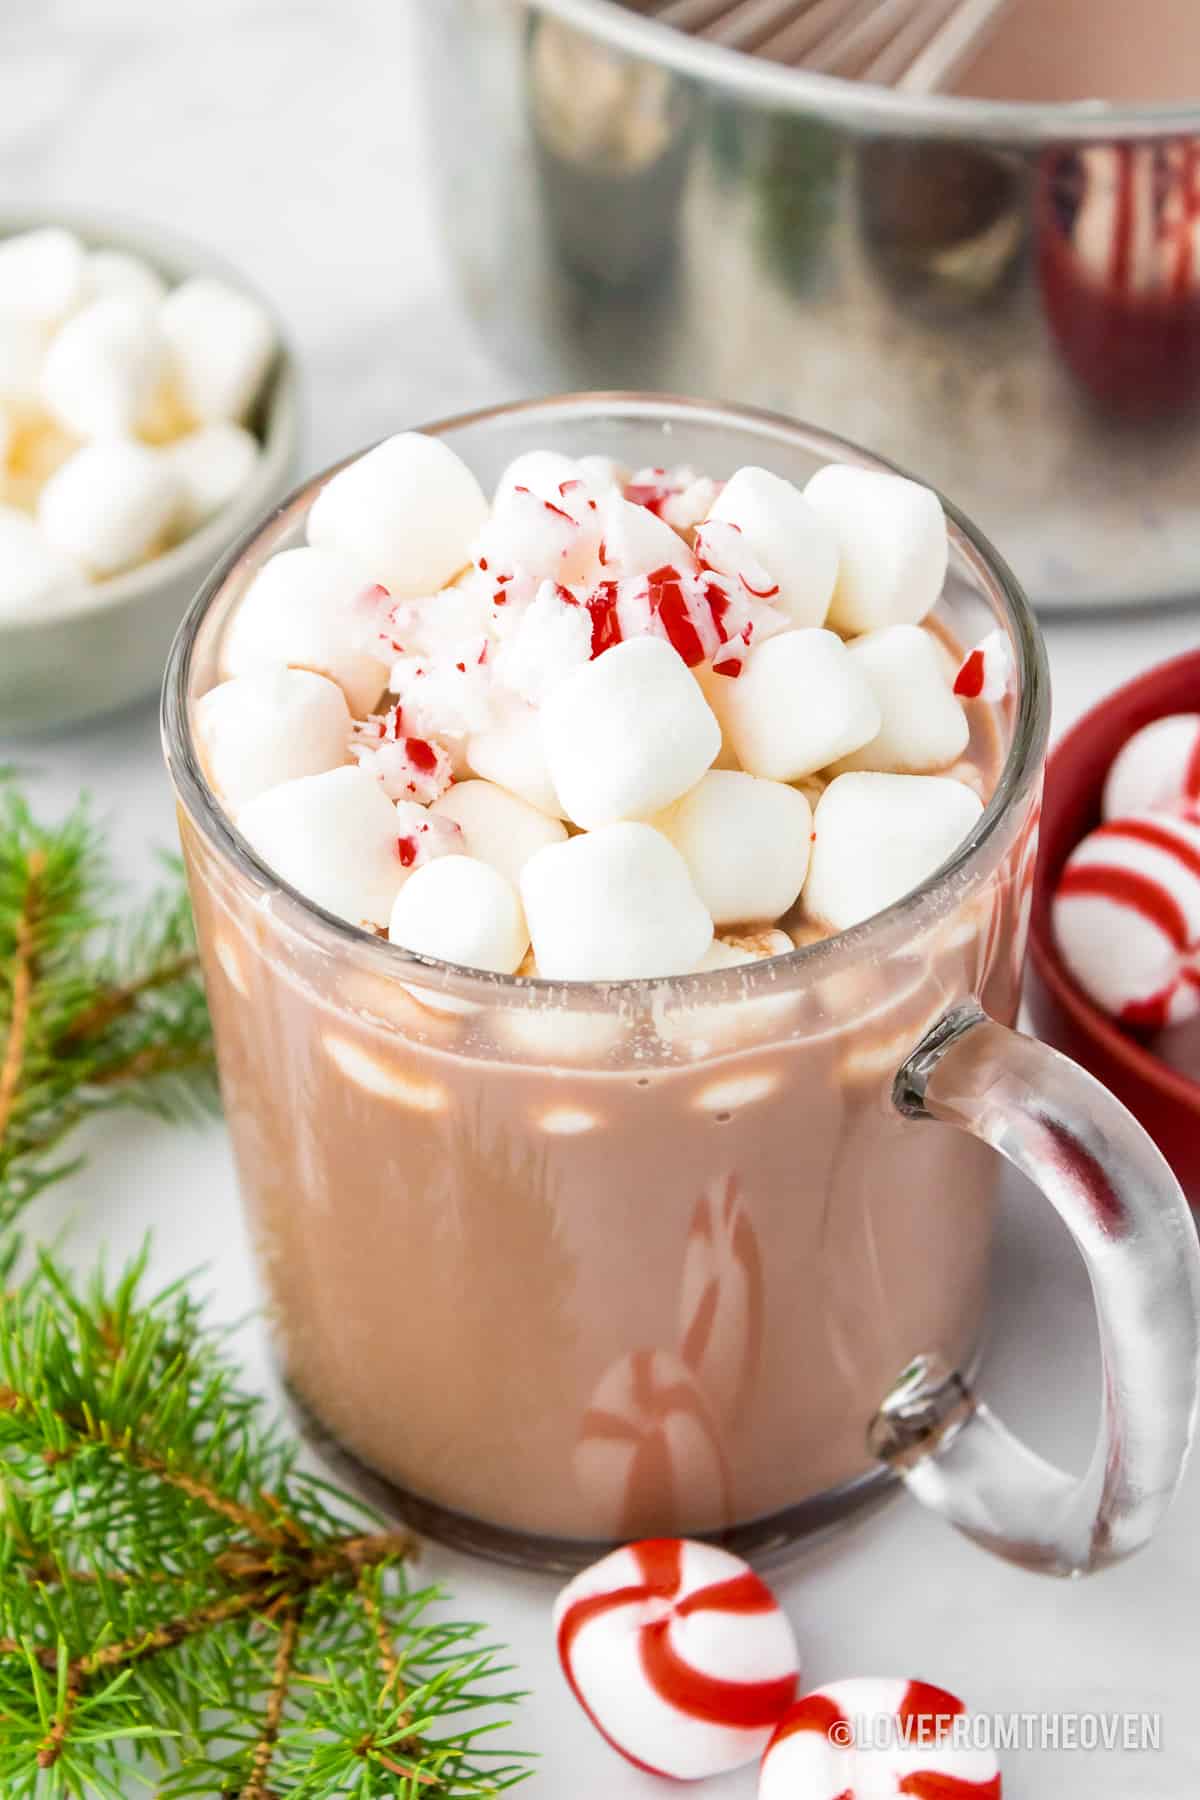 Festive hot cocoa toppers you can make for your toasty holiday drink!